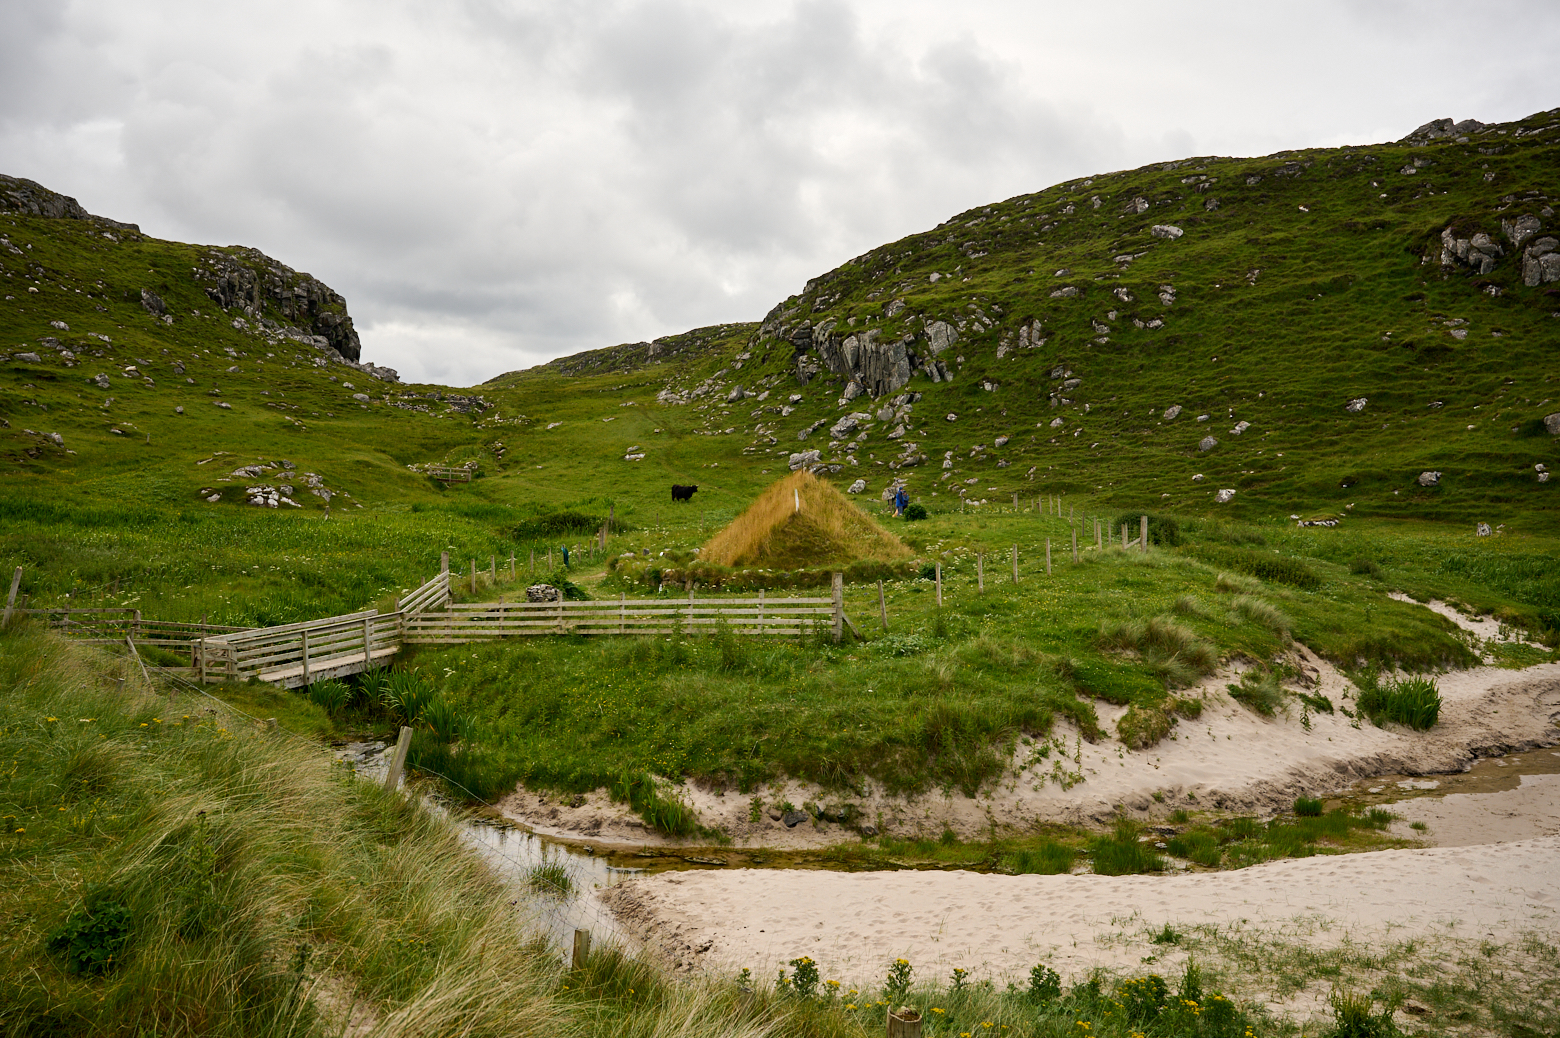 Visiting the Iron Age Village in Bosta, Isle of Lewis